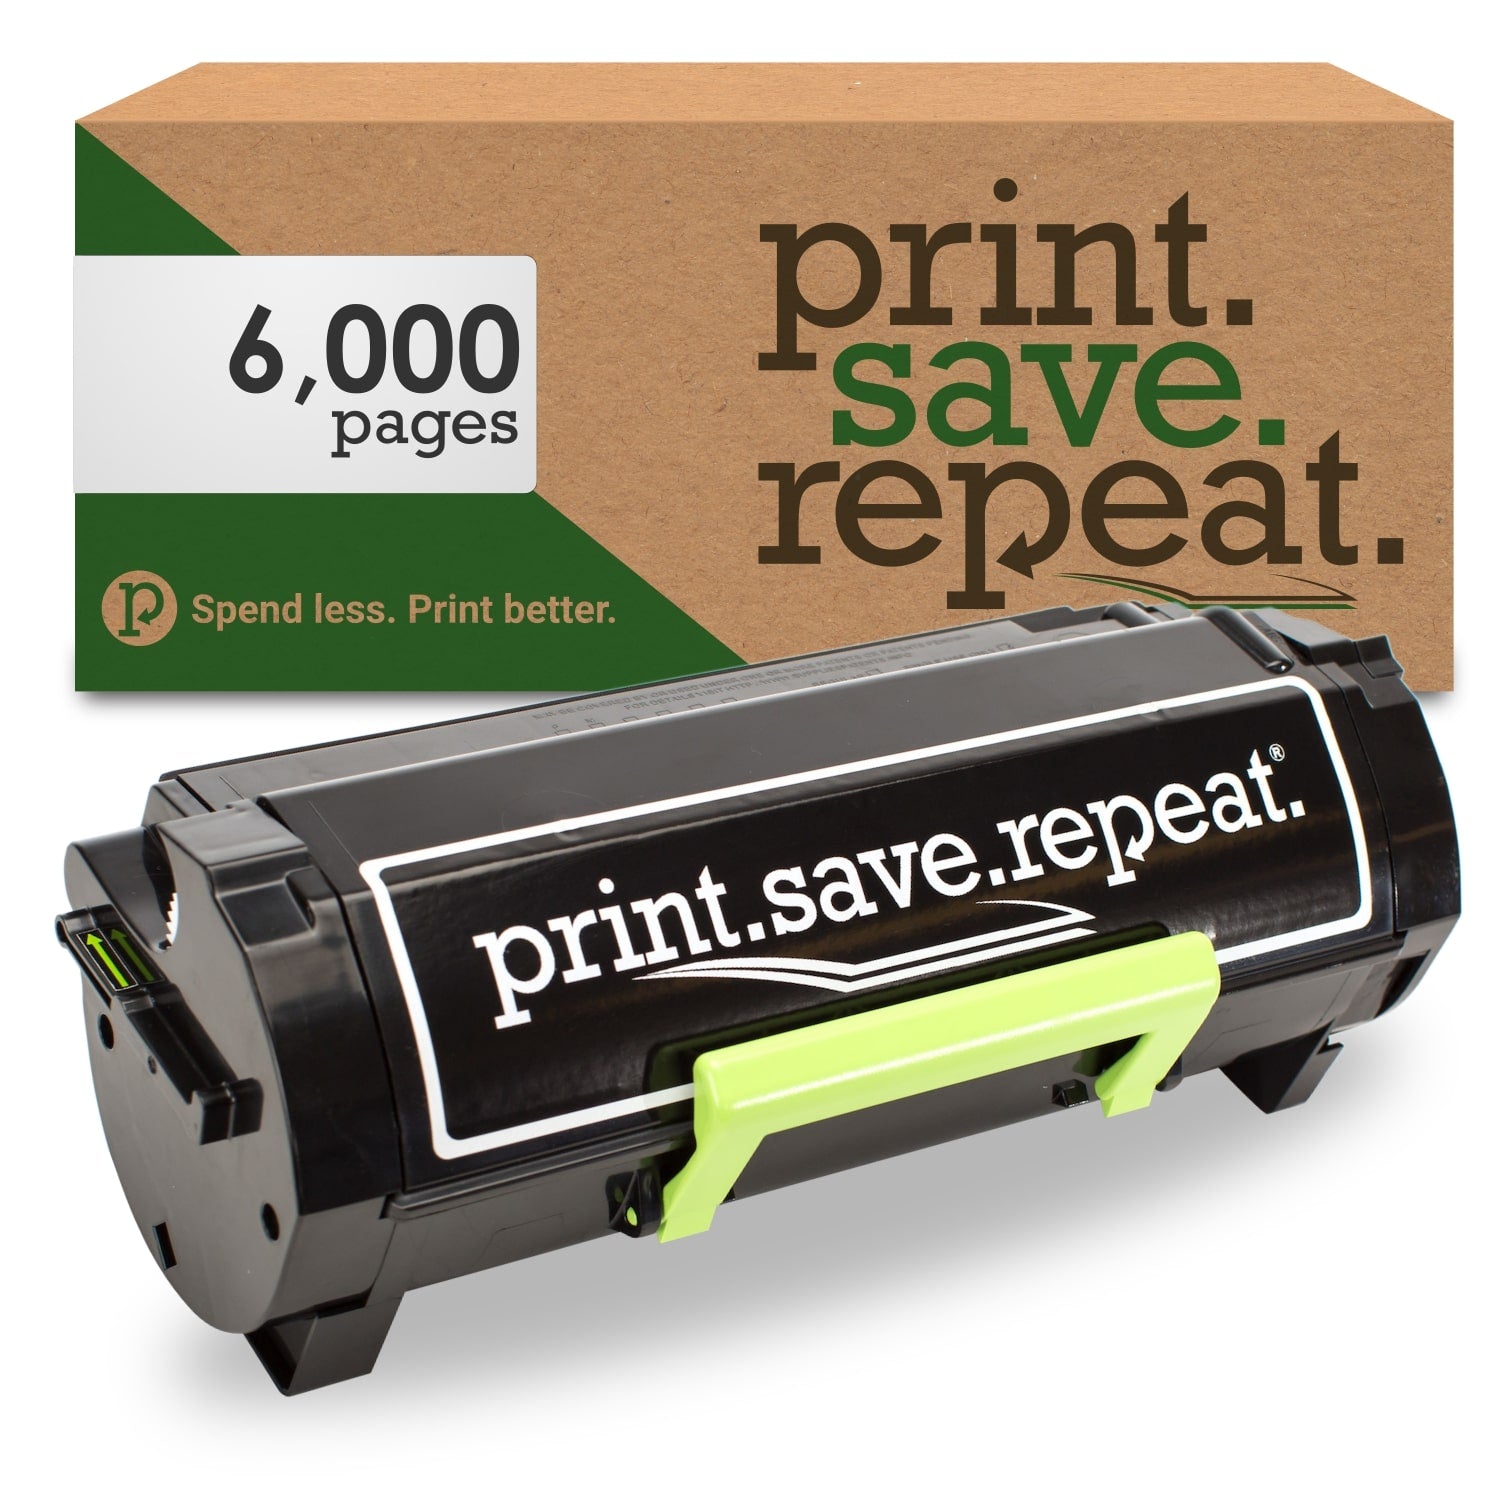 Print.Save.Repeat. Lexmark B241H00 High Yield Remanufactured Toner Cartridge for B2442, B2546, B2650, MB2442, MB2546, MB2650 [6,000 Pages]